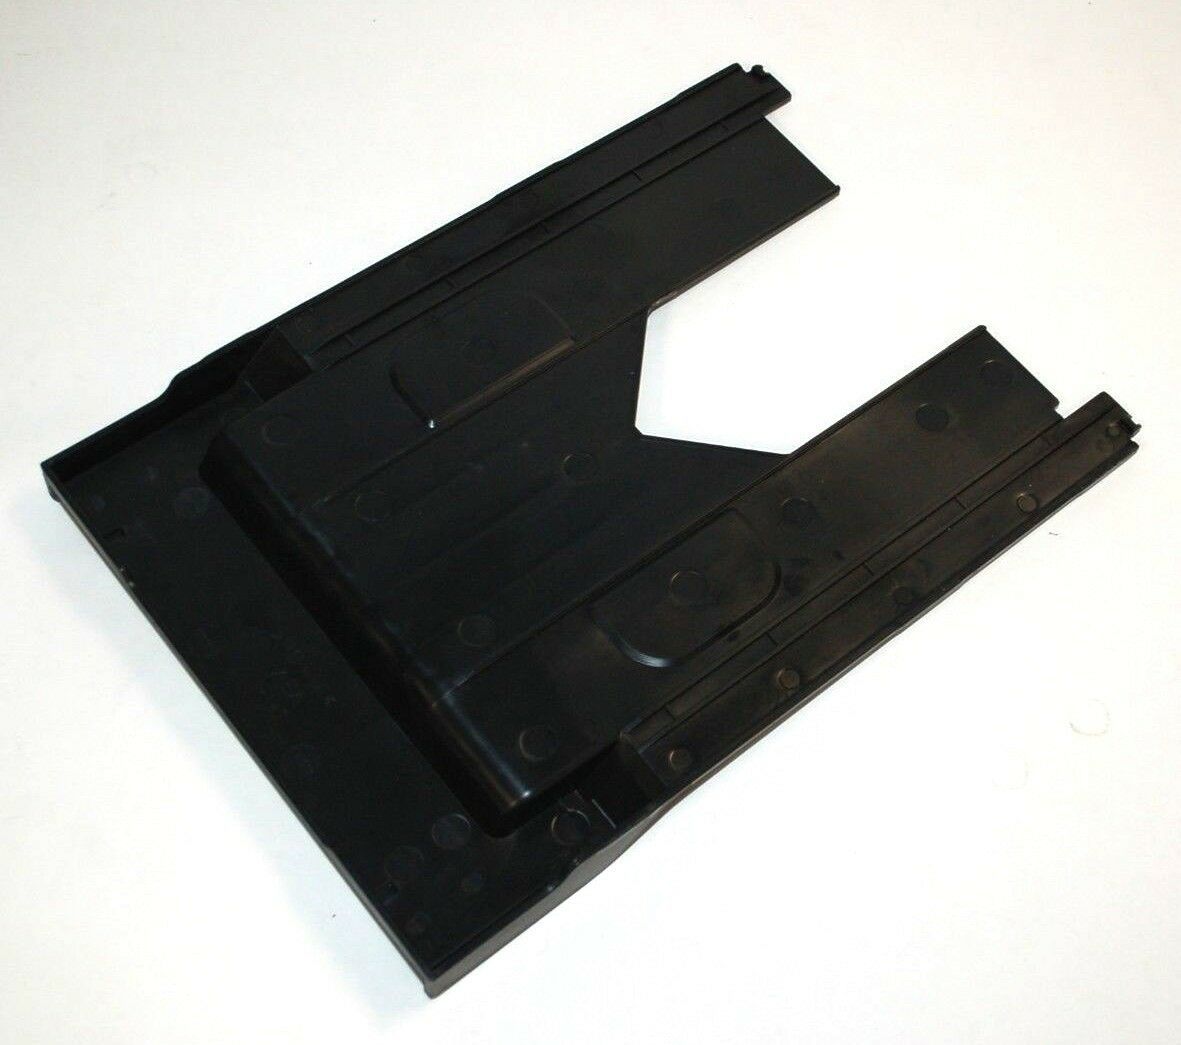 Epson Xp 610 Paper Output Tray Xp 600 Xp 520 Xp 630 Xp 830 Feeders And Trays 1665